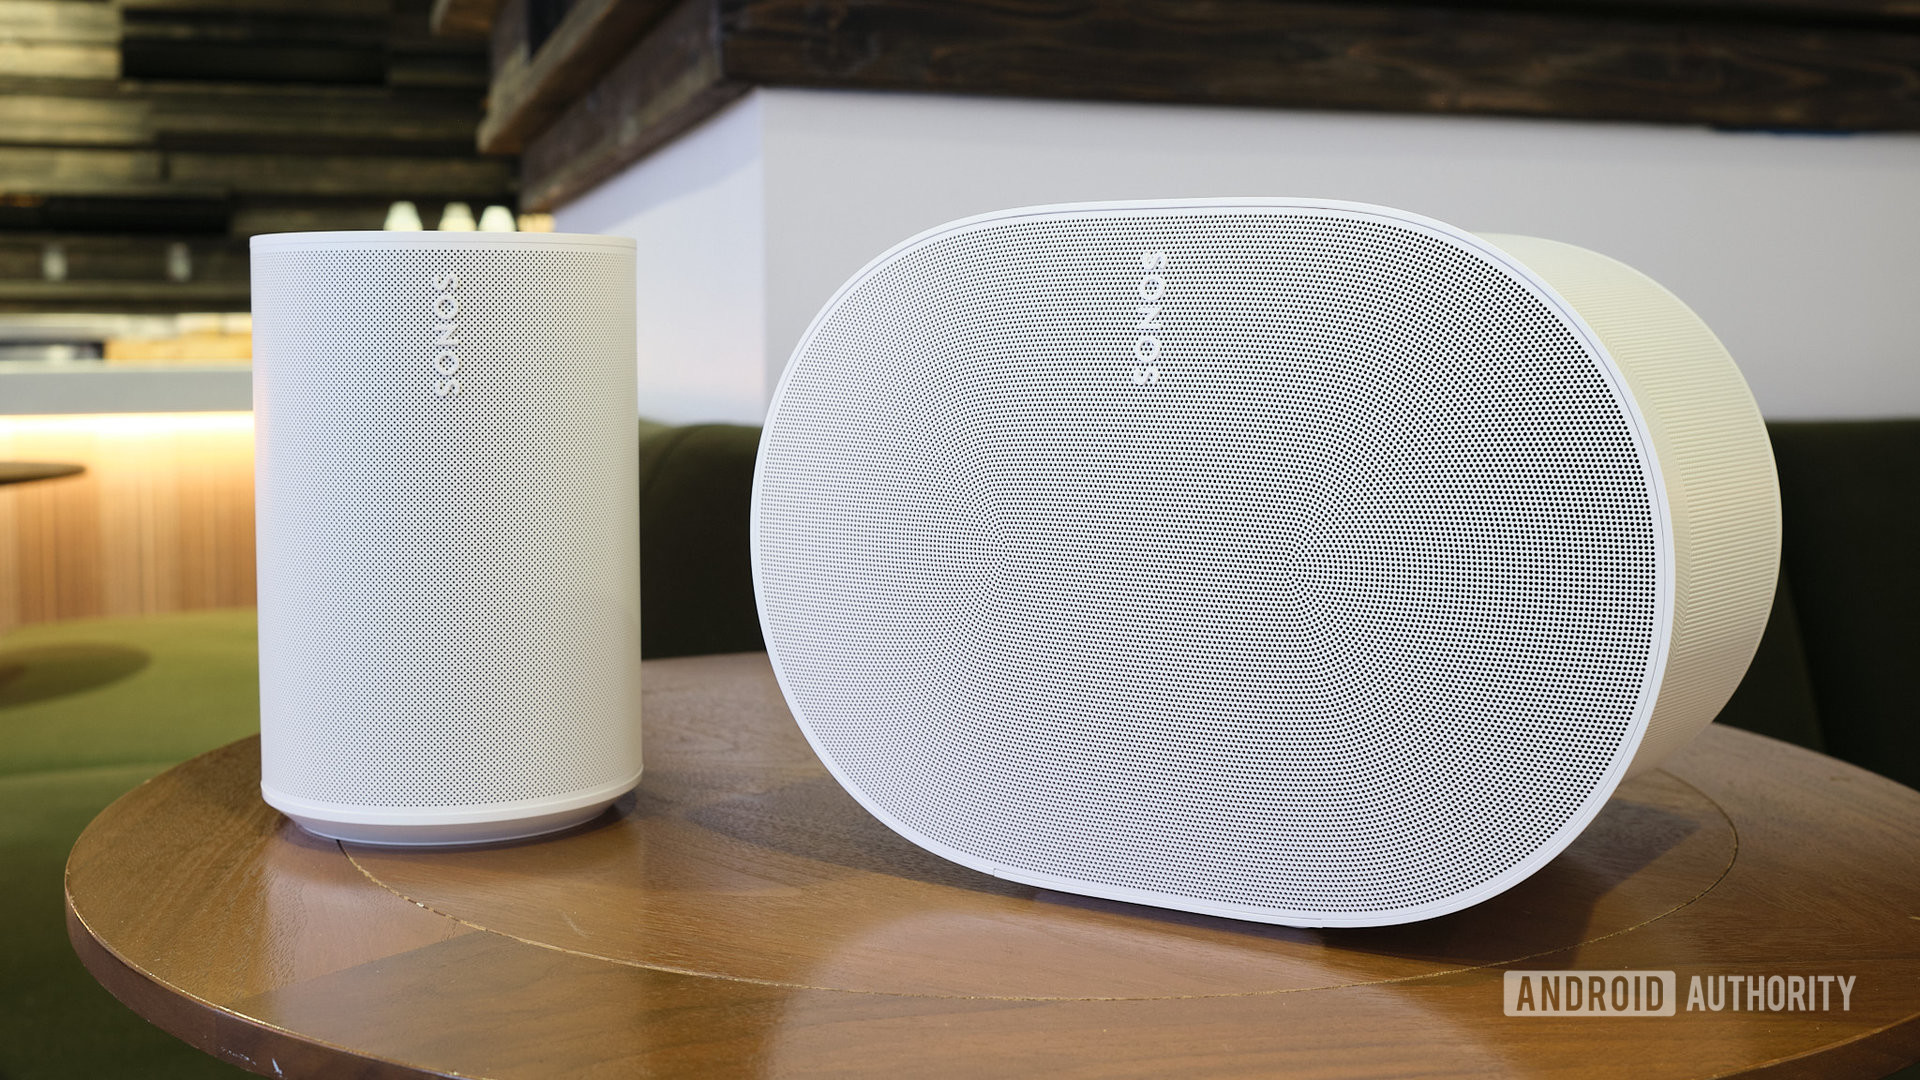 The Sonos Era 300 and Era 100 smart speakers on a table.